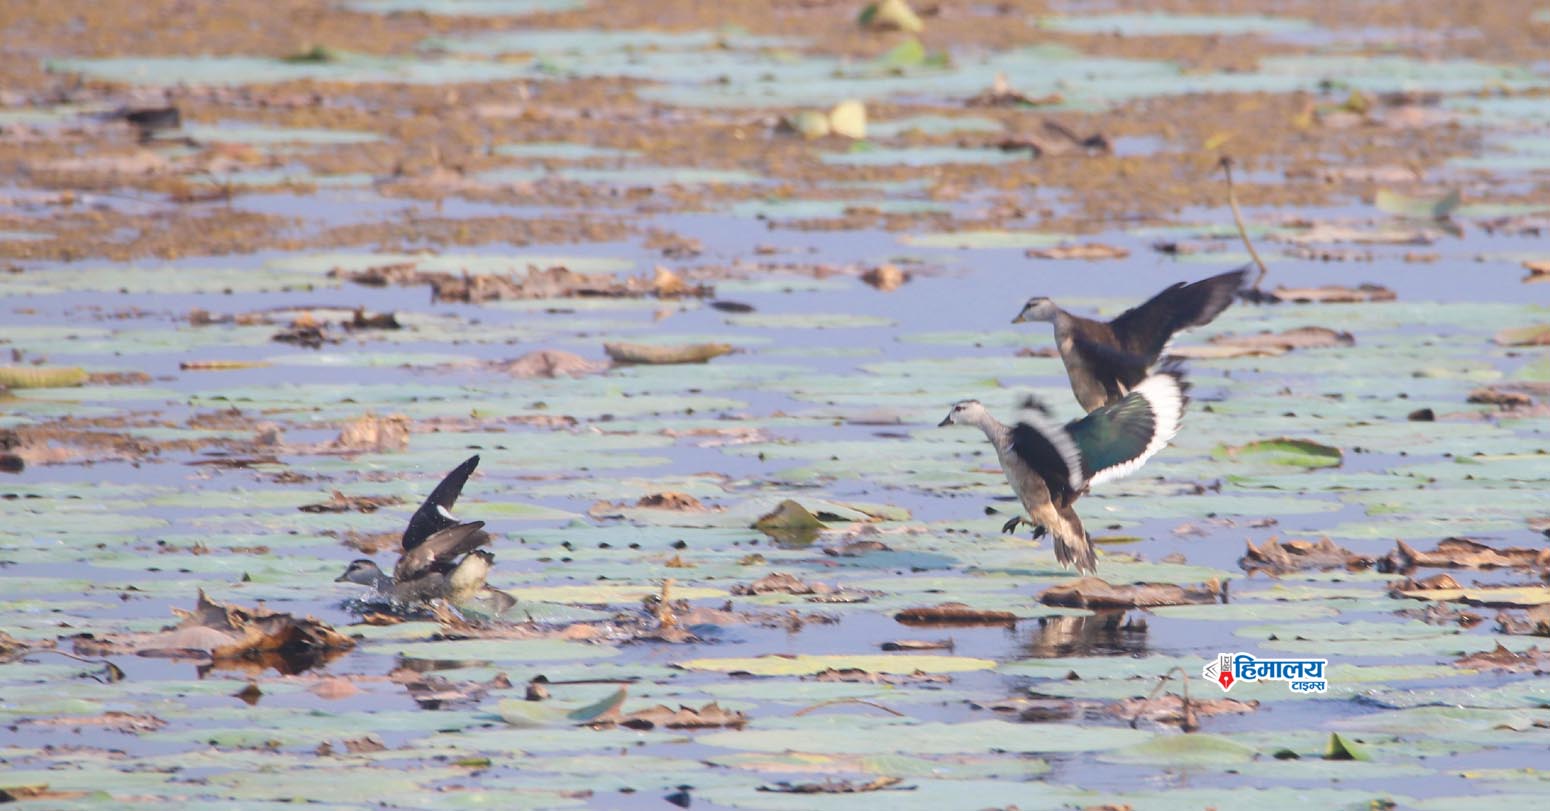 Jagdishpur Lake Enticing With Birds (In Pictures)